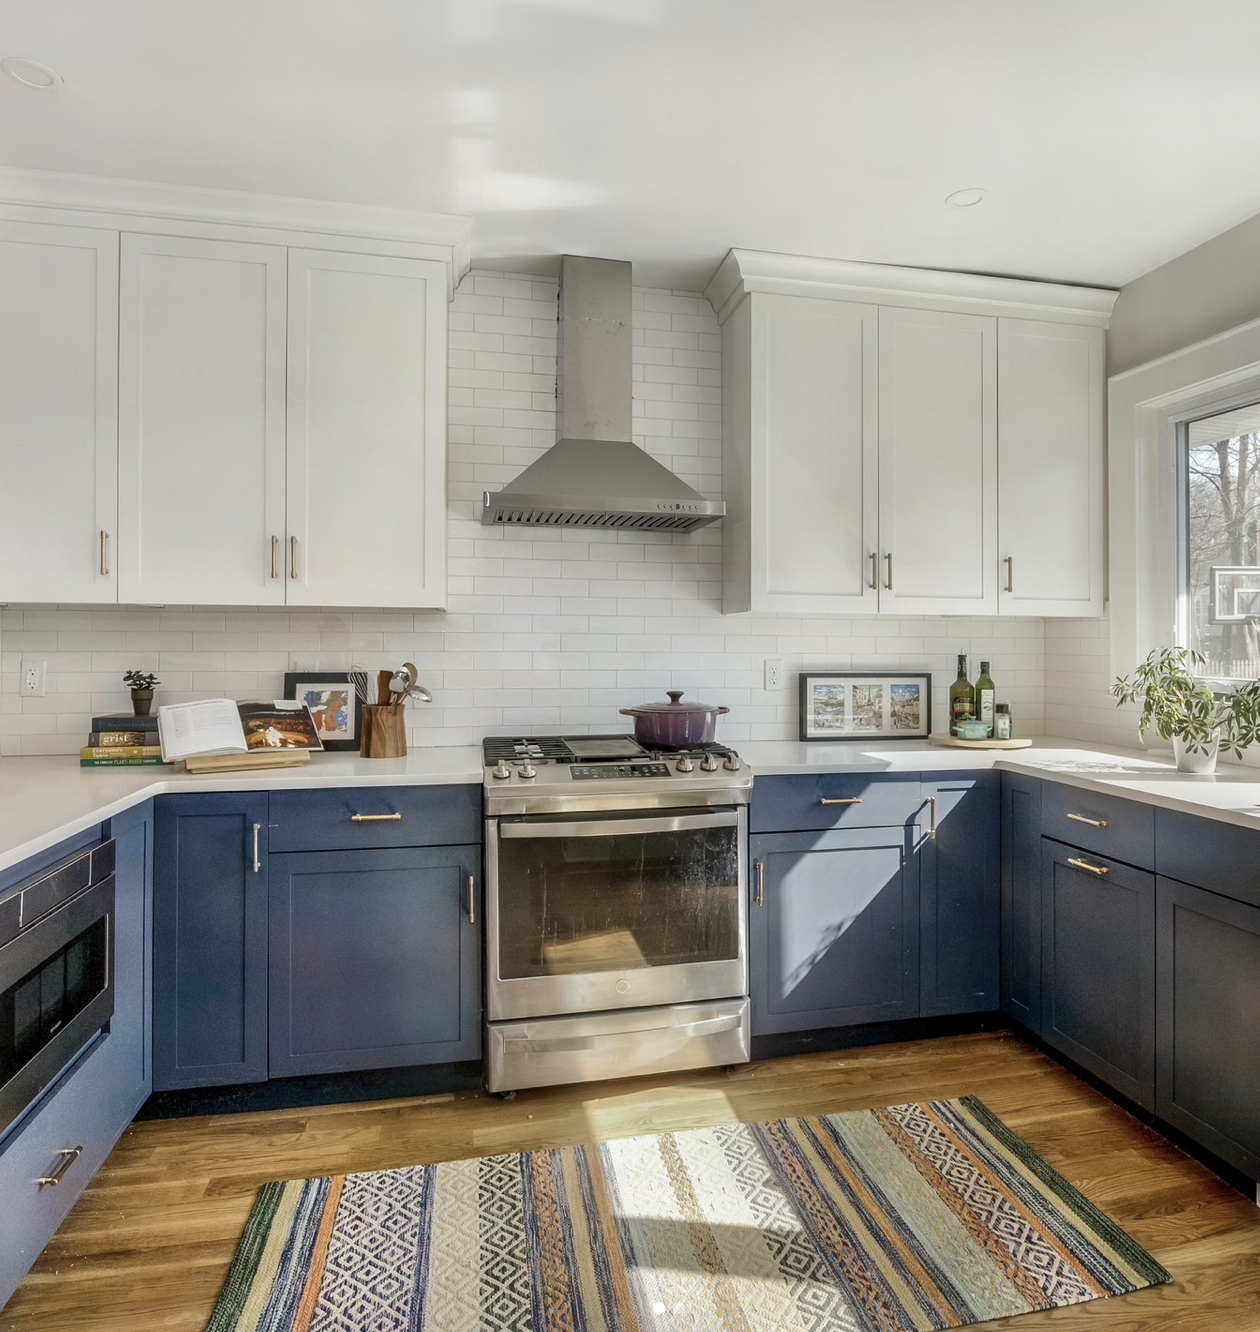 Plenty Two-Tone Cabinets For A U-Shaped Kitchen